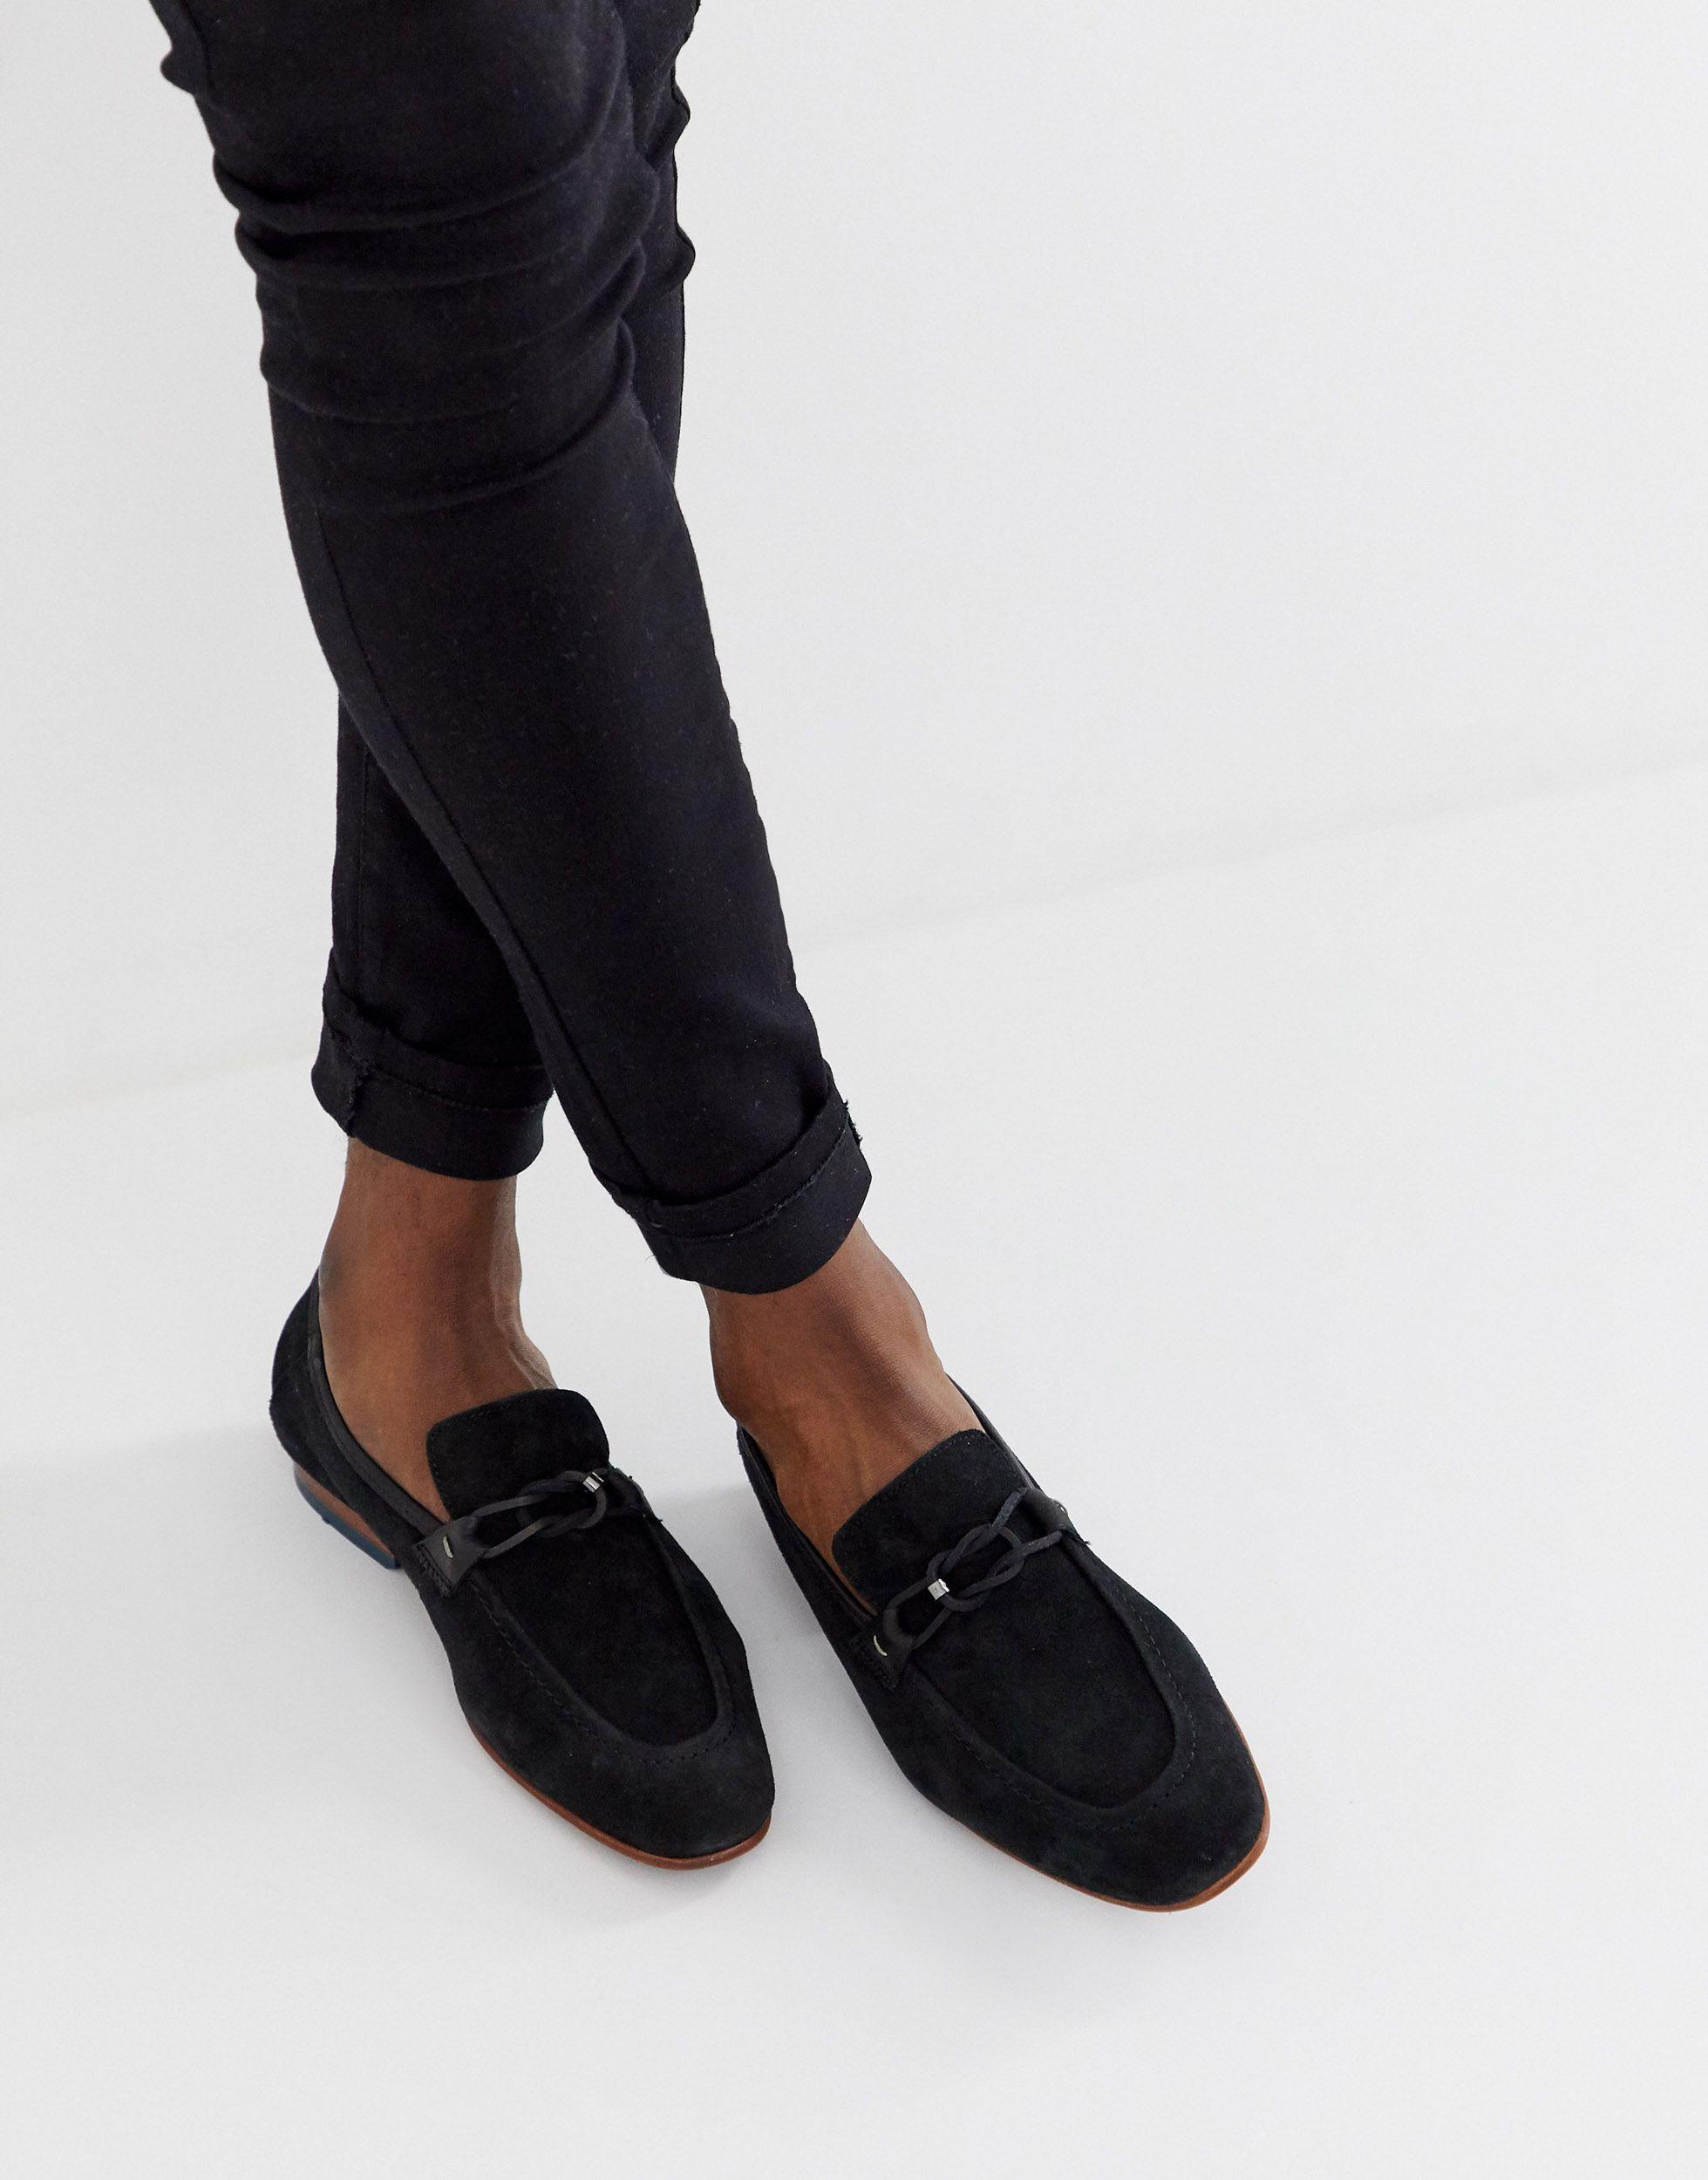 Ted Baker Suede Siblac Loafers in Black for Men - Lyst